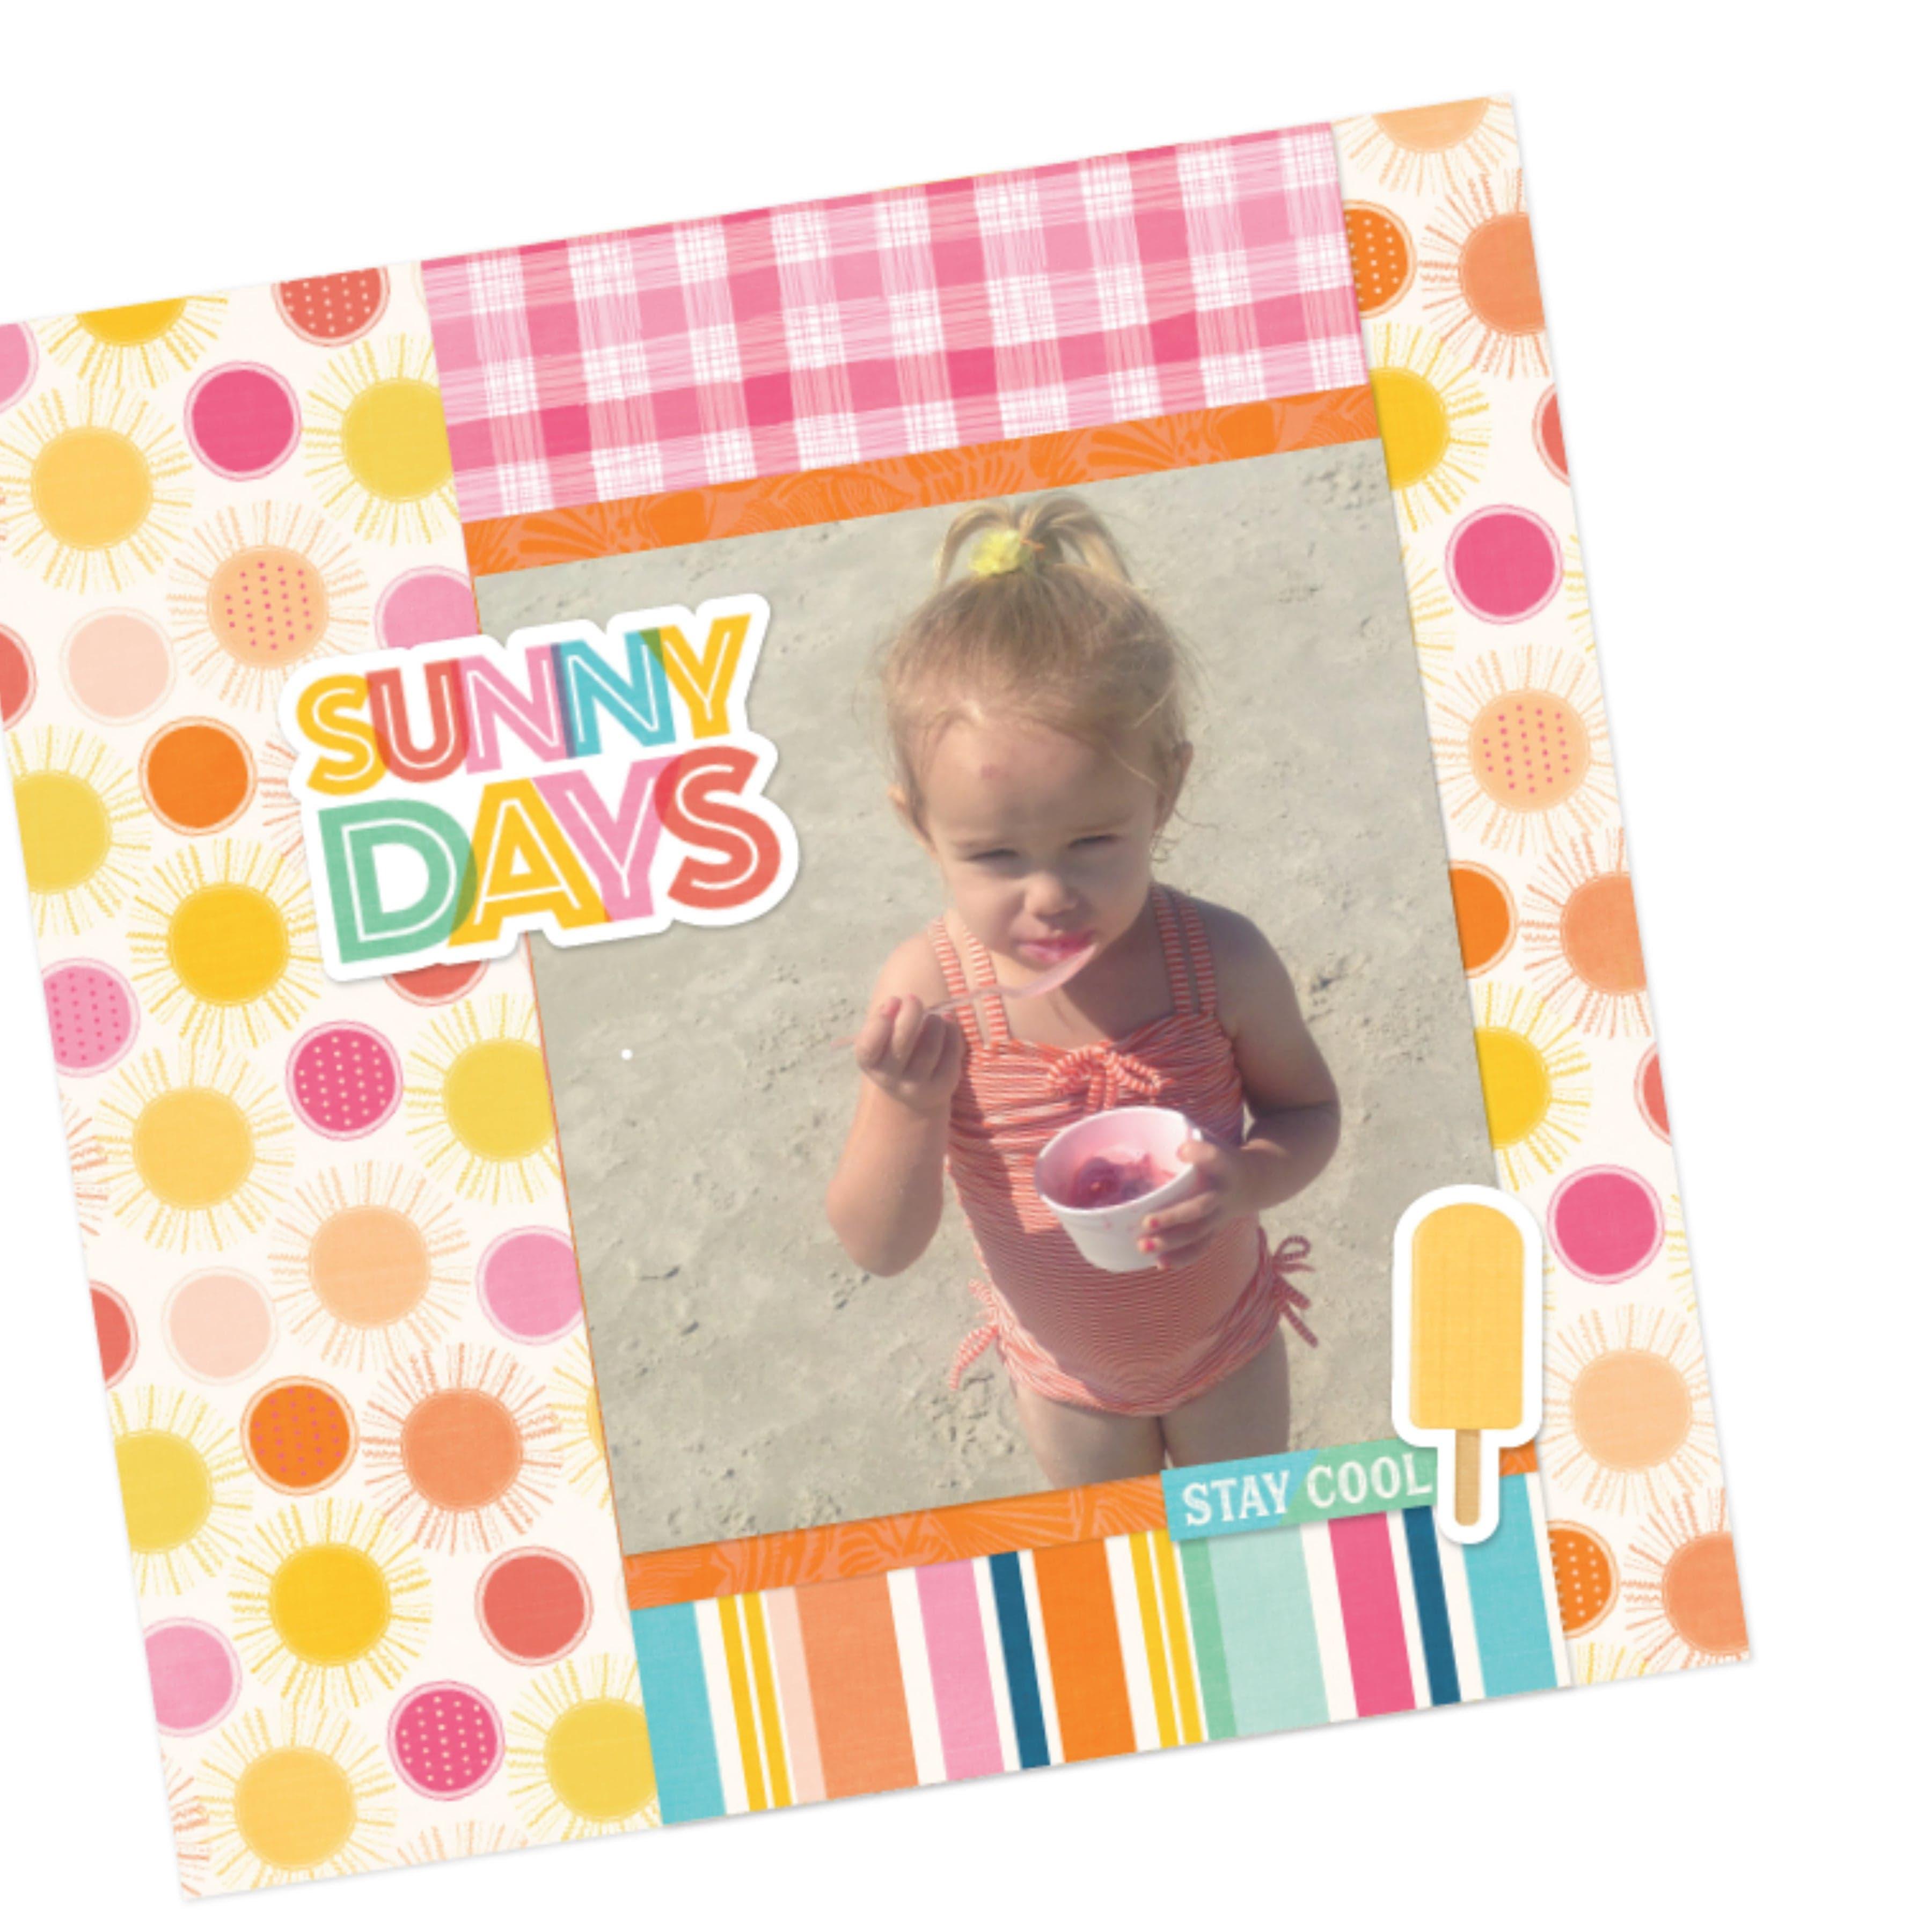 Sweet Sunshine Collection Stay Cool 12 x 12 Double-Sided Scrapbook Paper by Photo Play Paper - Scrapbook Supply Companies